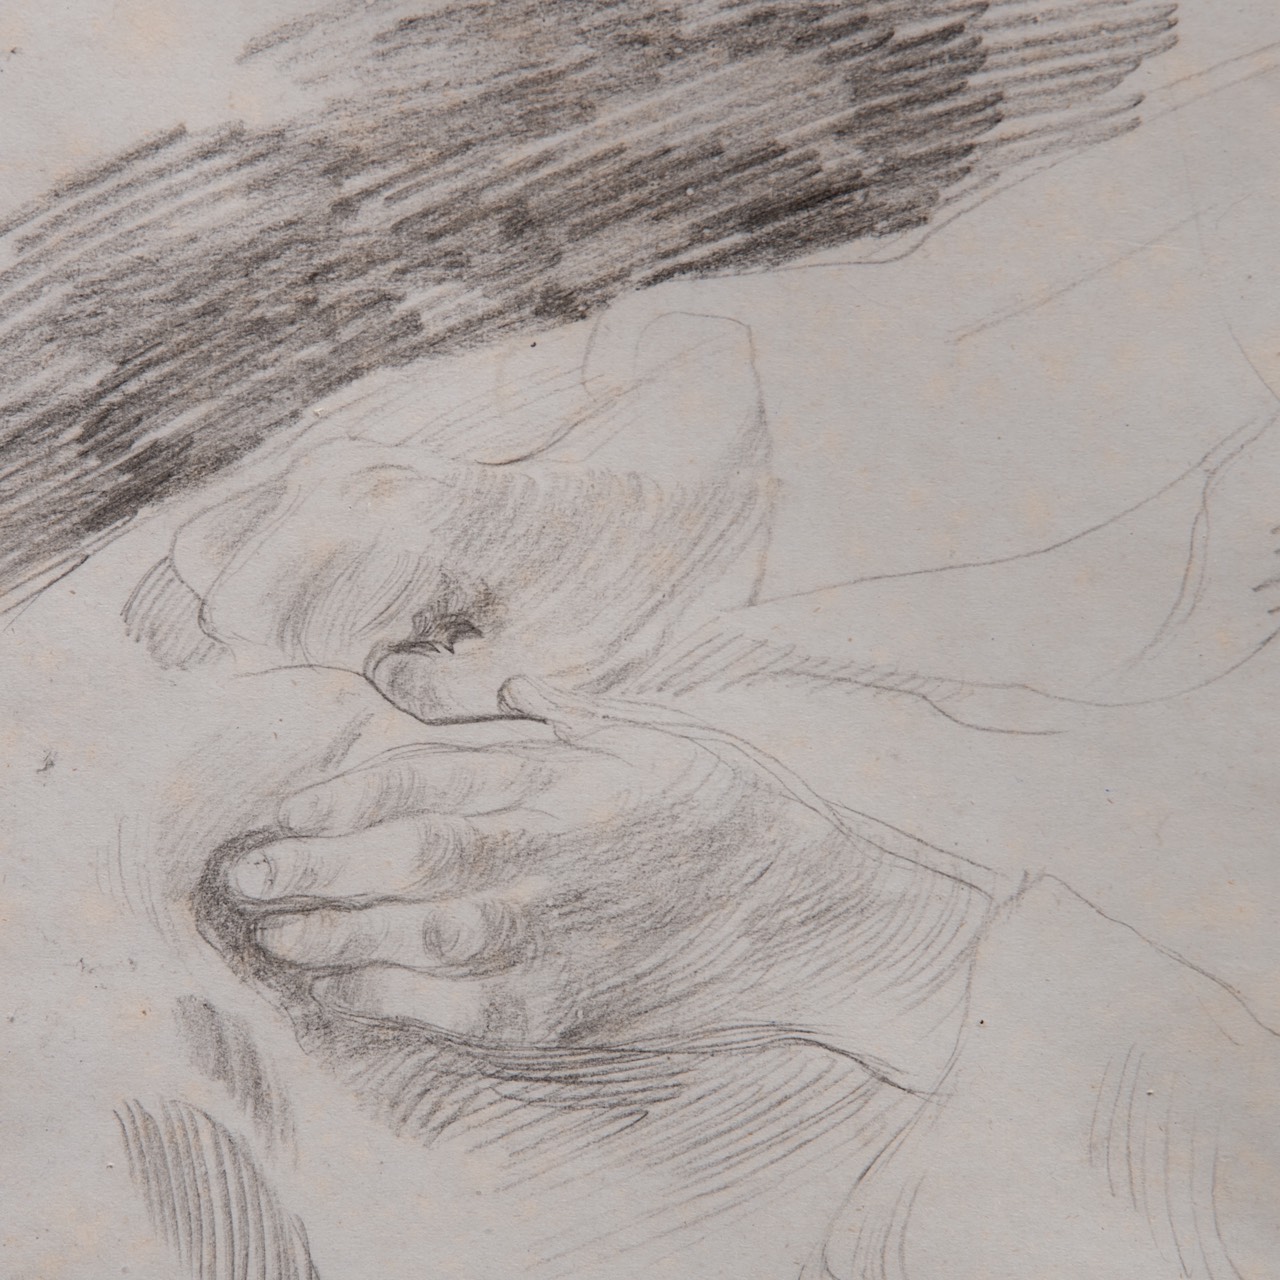 James Ensor (1860-1949), hands at work, pencil drawing on paper 16.5 x 21 cm. (6 1/2 x 8.2 in.), Fra - Image 5 of 5